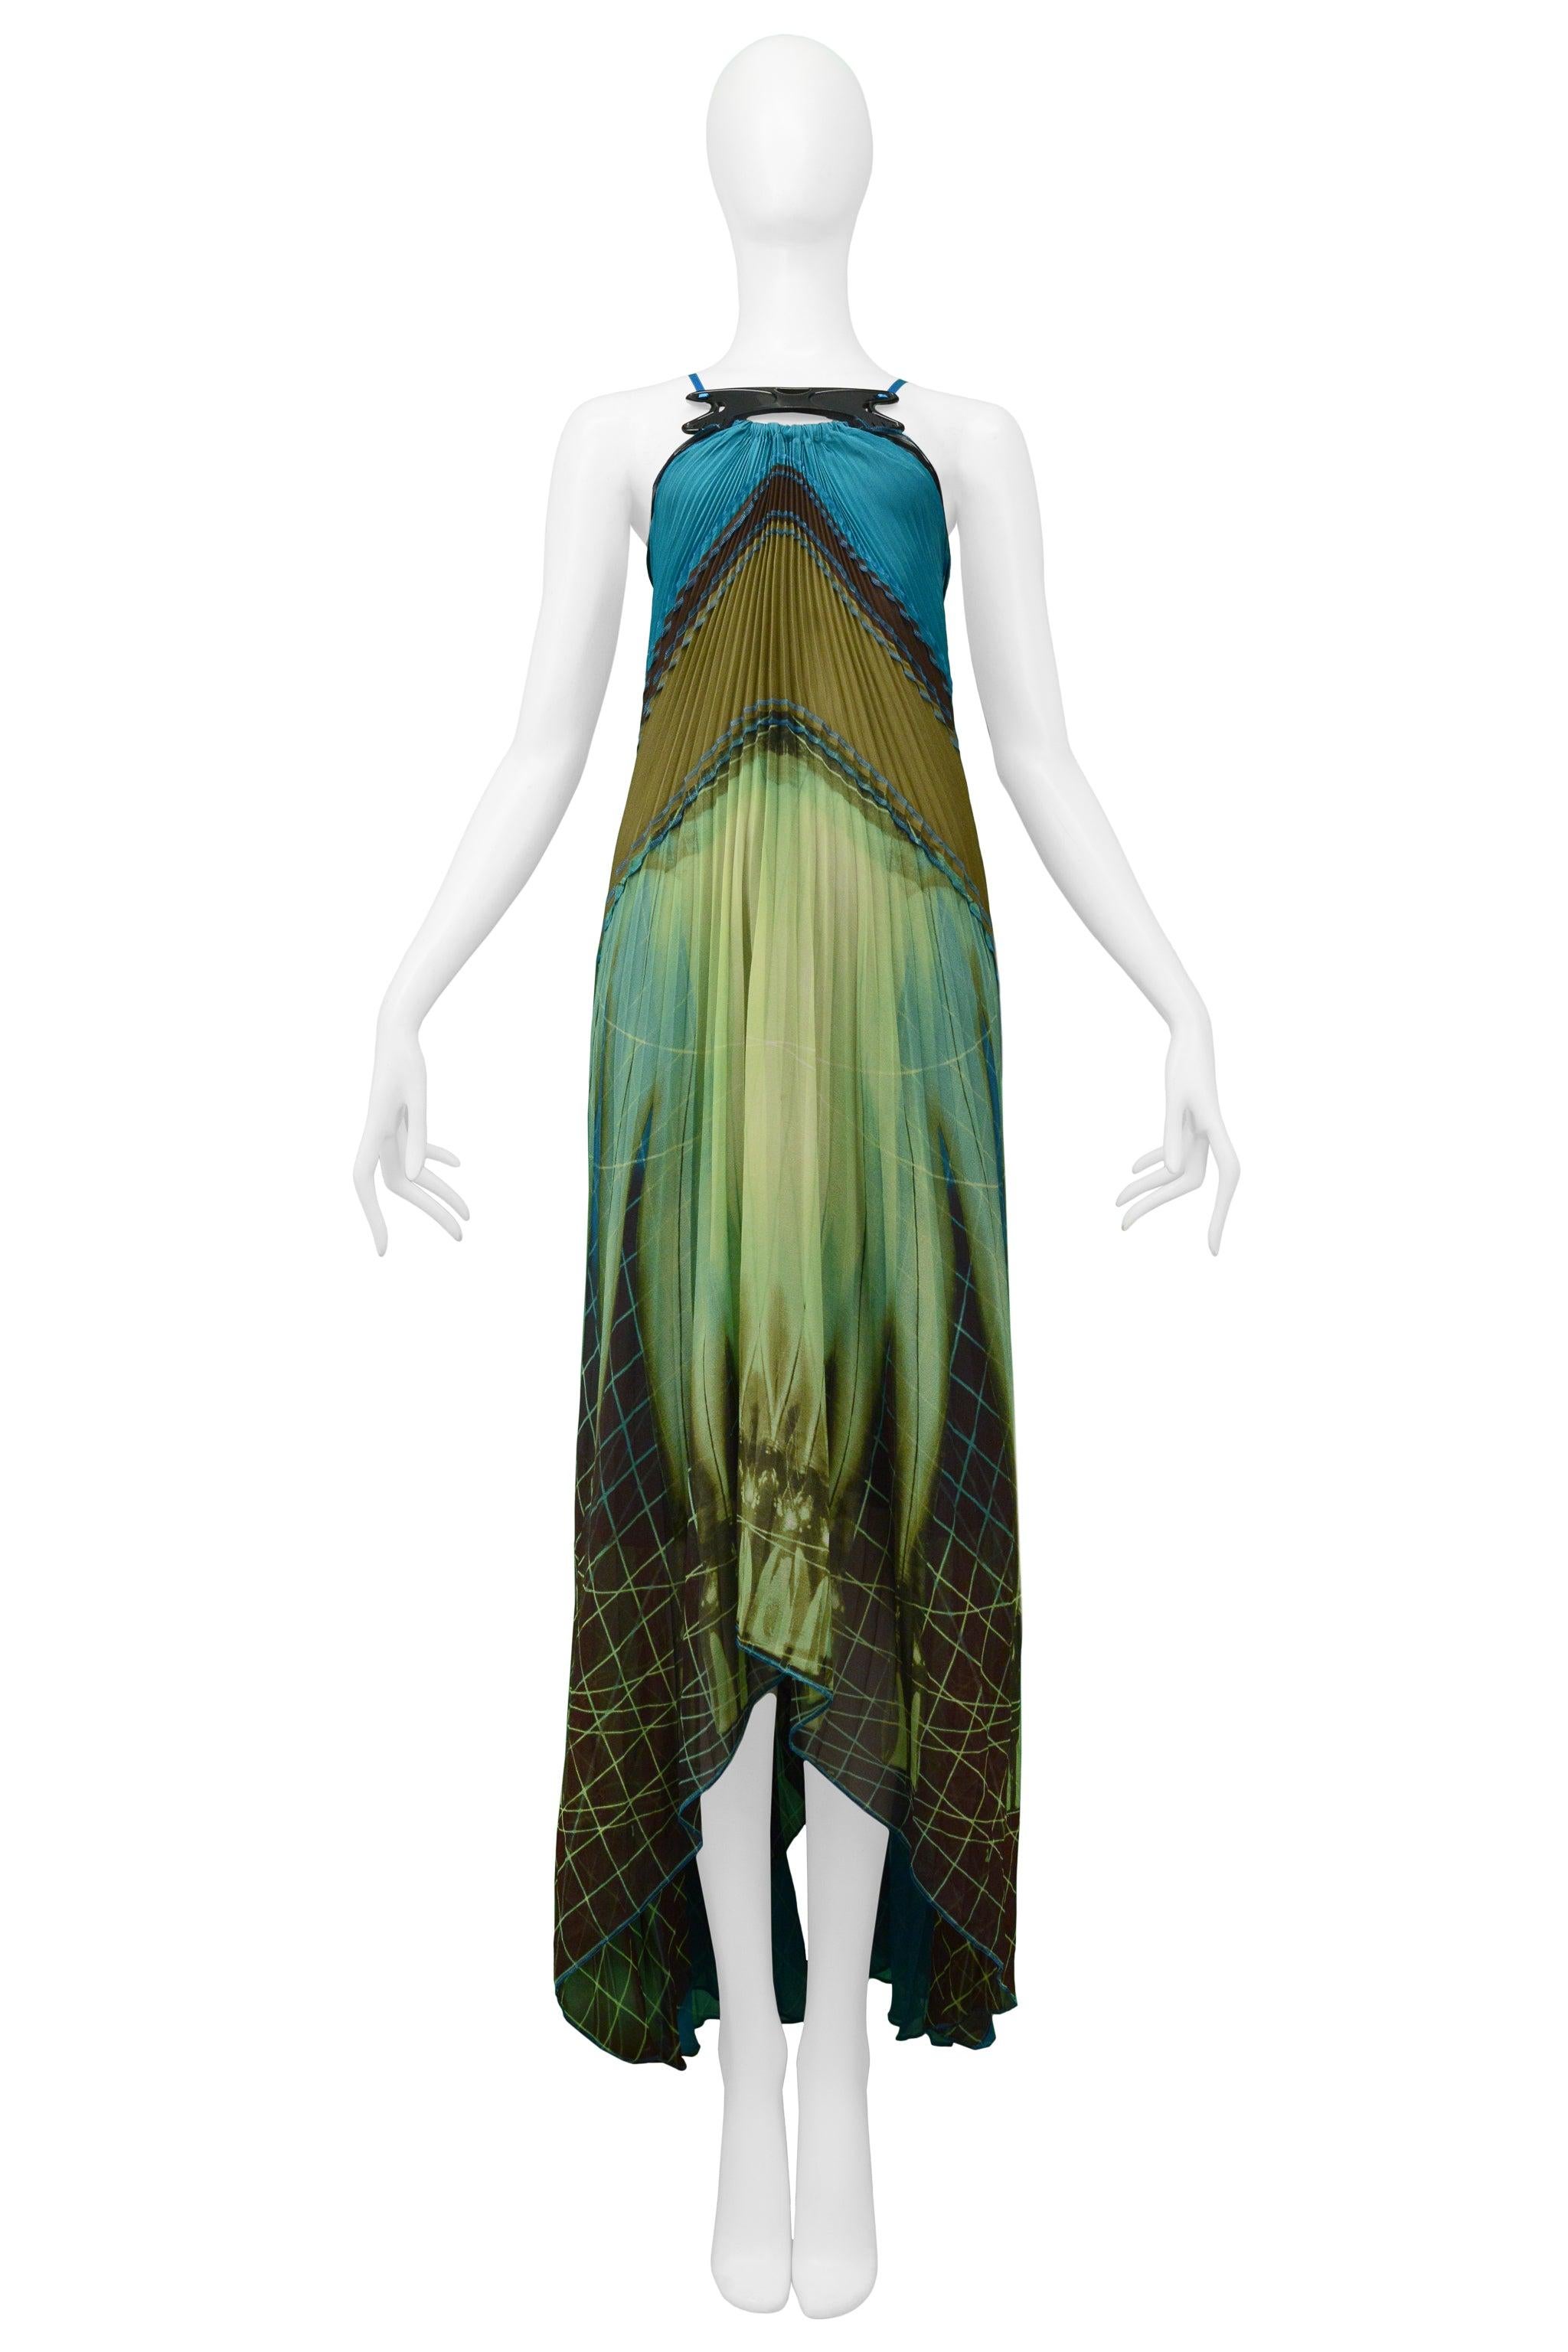 Resurrection Vintage is excited to offer a vintage Jean Paul Gaultier halter dress featuring a futuristic abstract print, pleated body, acrylic collar, and satin ribbons.

Jean Paul Gaultier
Size FR 36
100% Silk 
Excellent Vintage